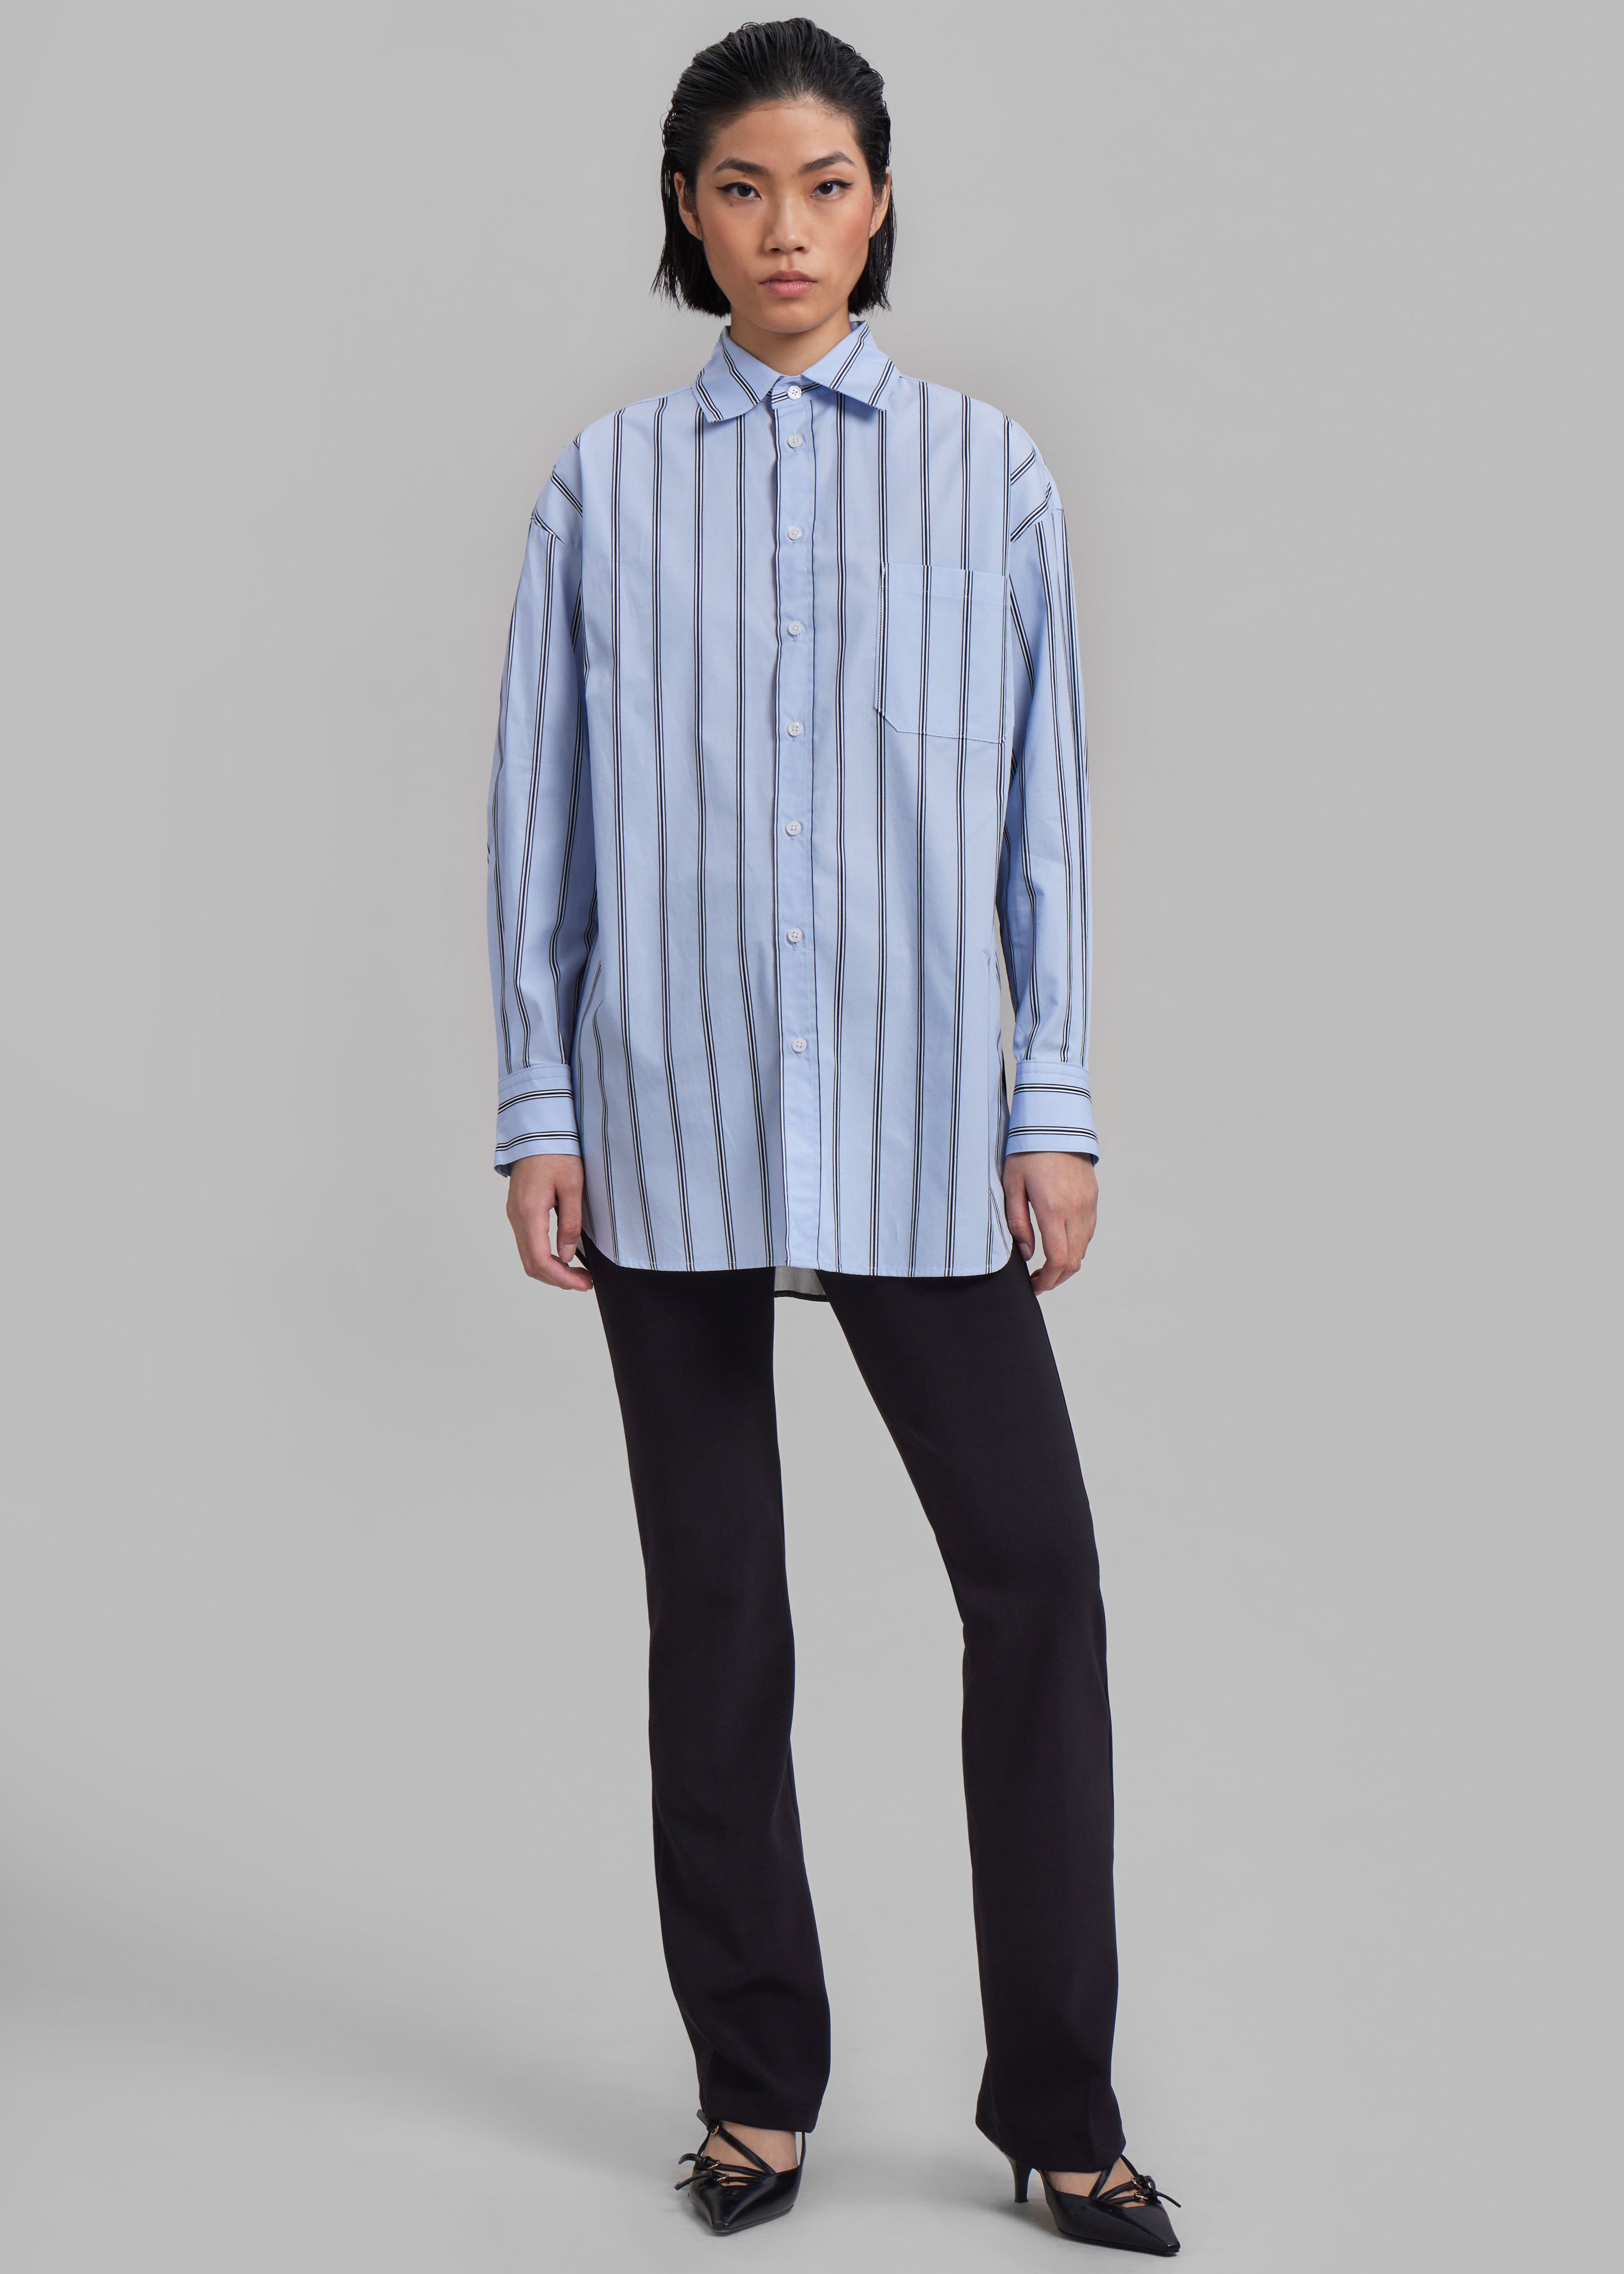 Puppets And Puppets Cronenberg Oversized Striped Button Down Shirt - Blue Stripe - 3